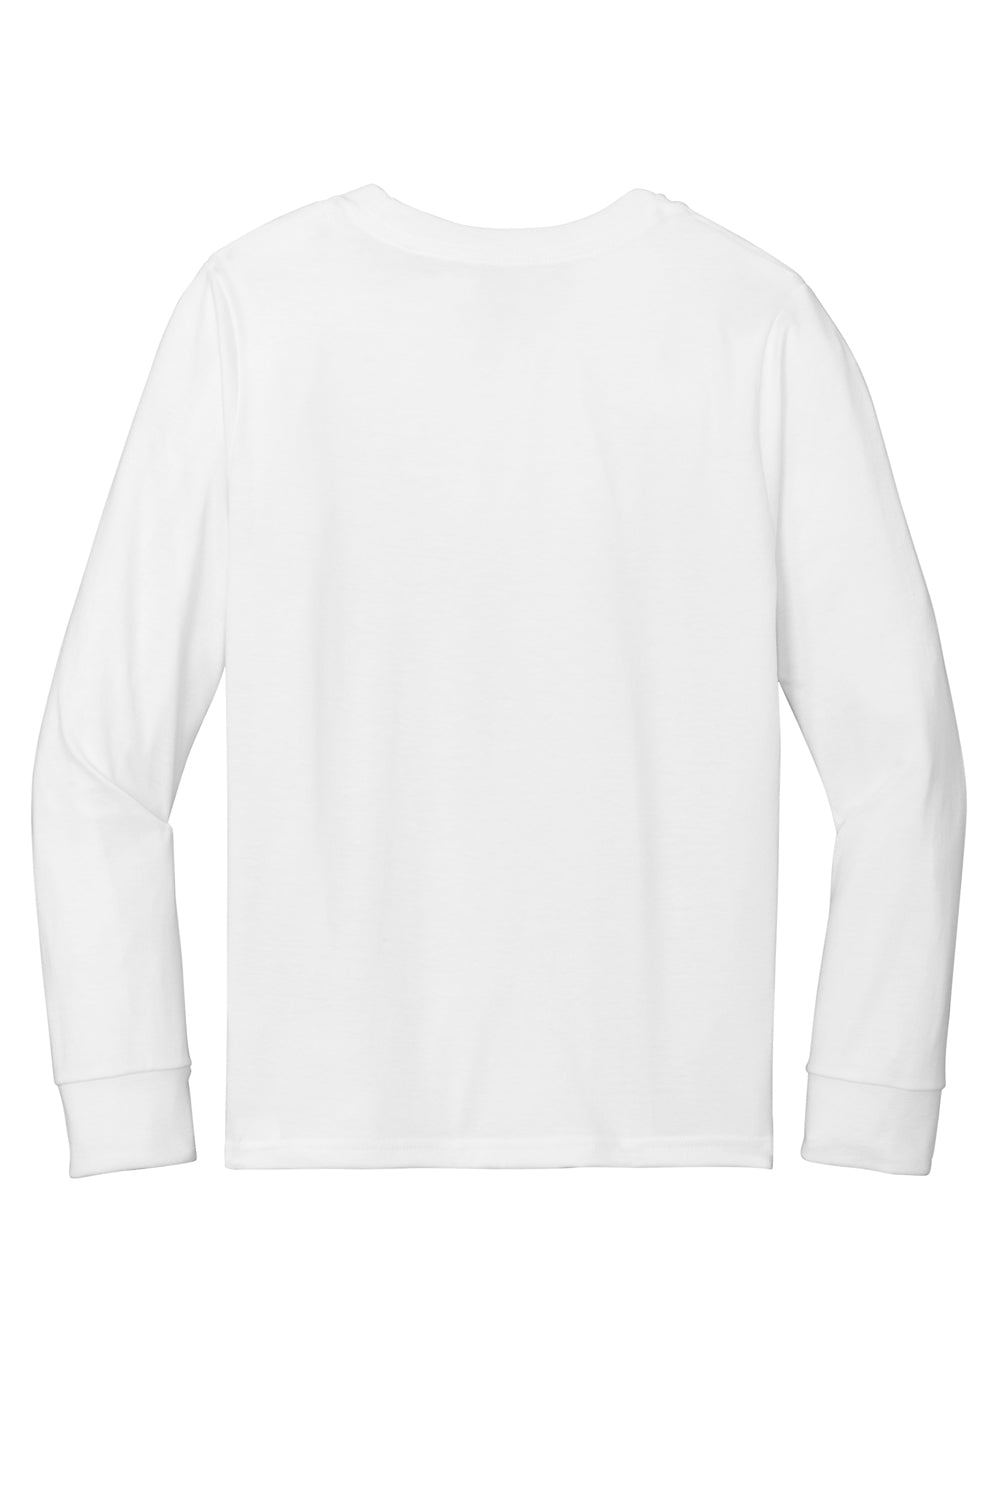 District Youth Perfect Tri Long Sleeve Crewneck T-Shirt White Flat Back